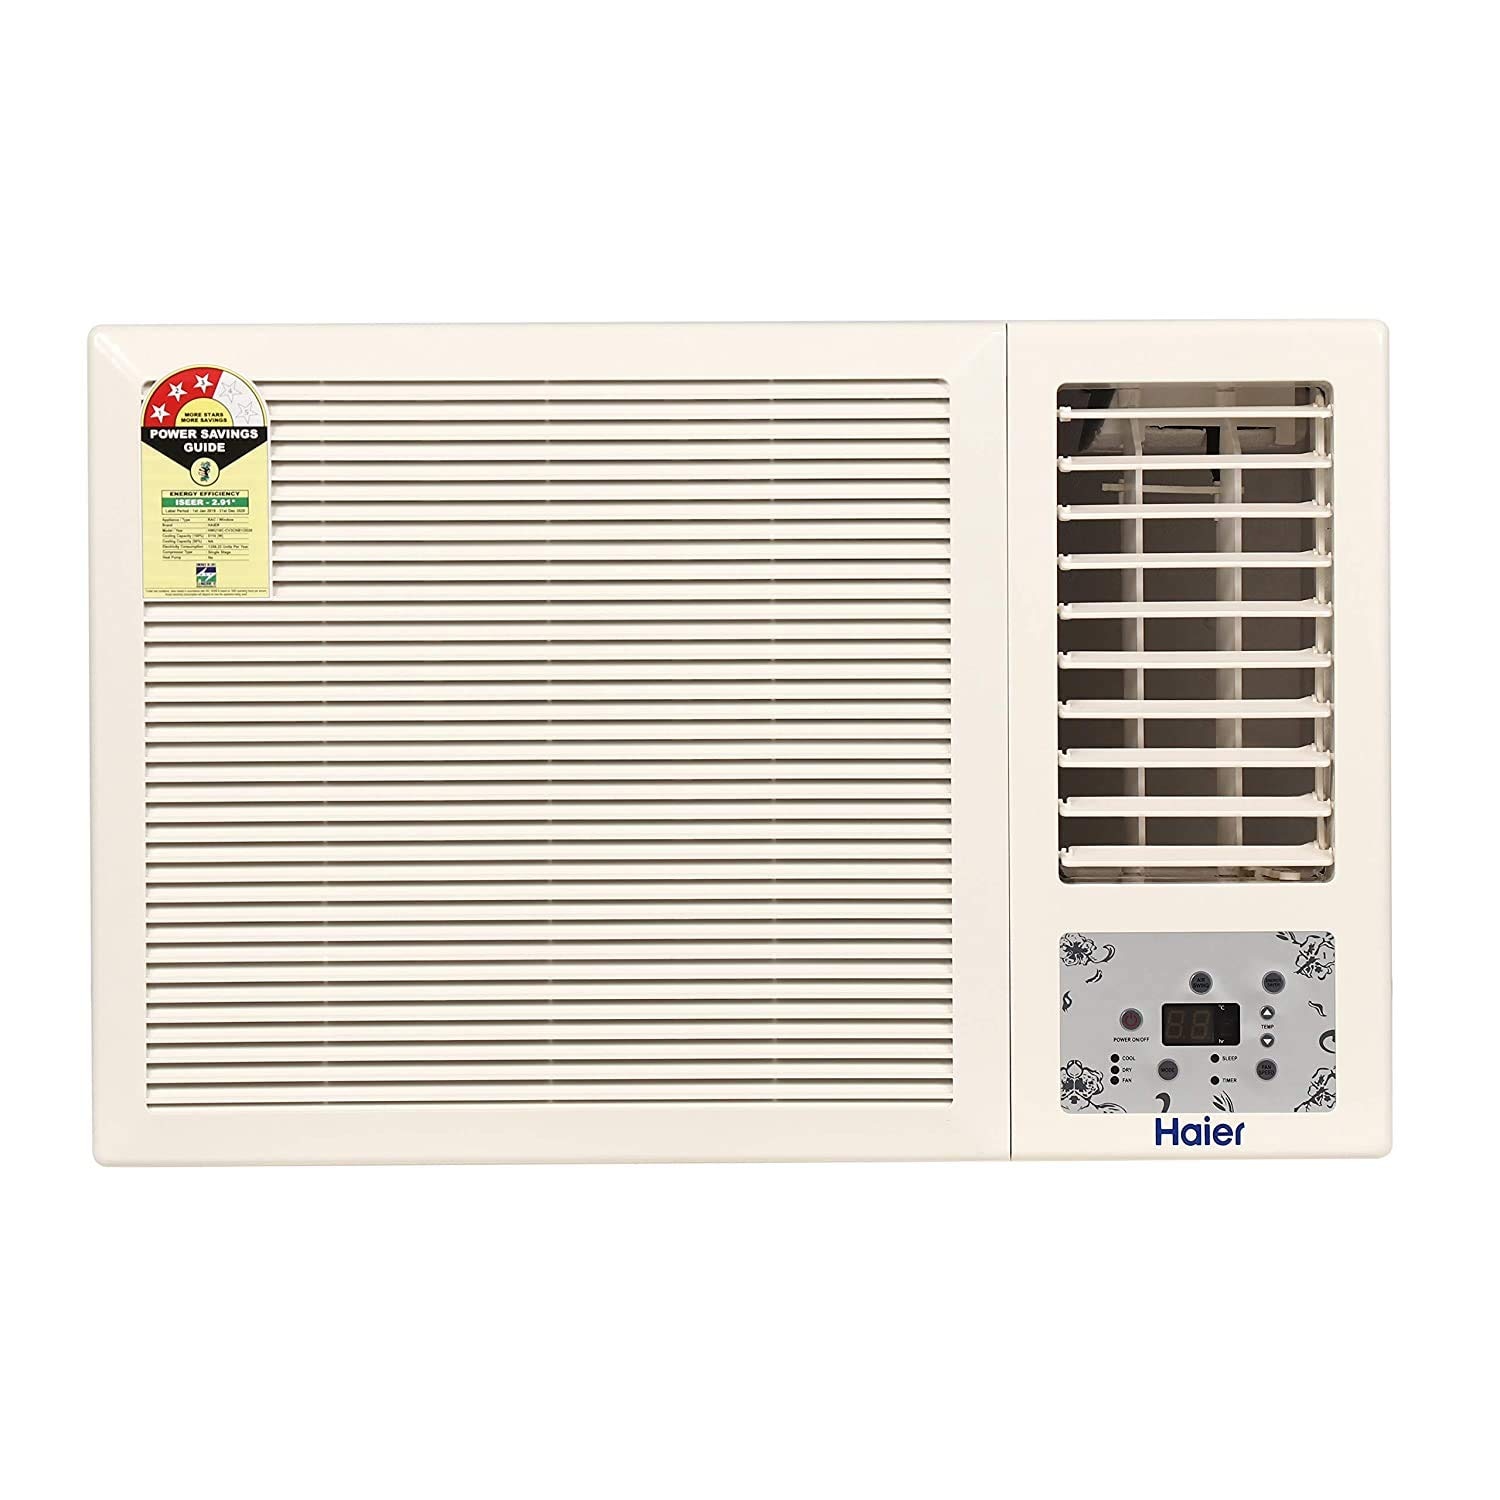 Amazon Deal: Price Competitive Window ACs Of Brands Like Voltas, LG On Sale - Details Here